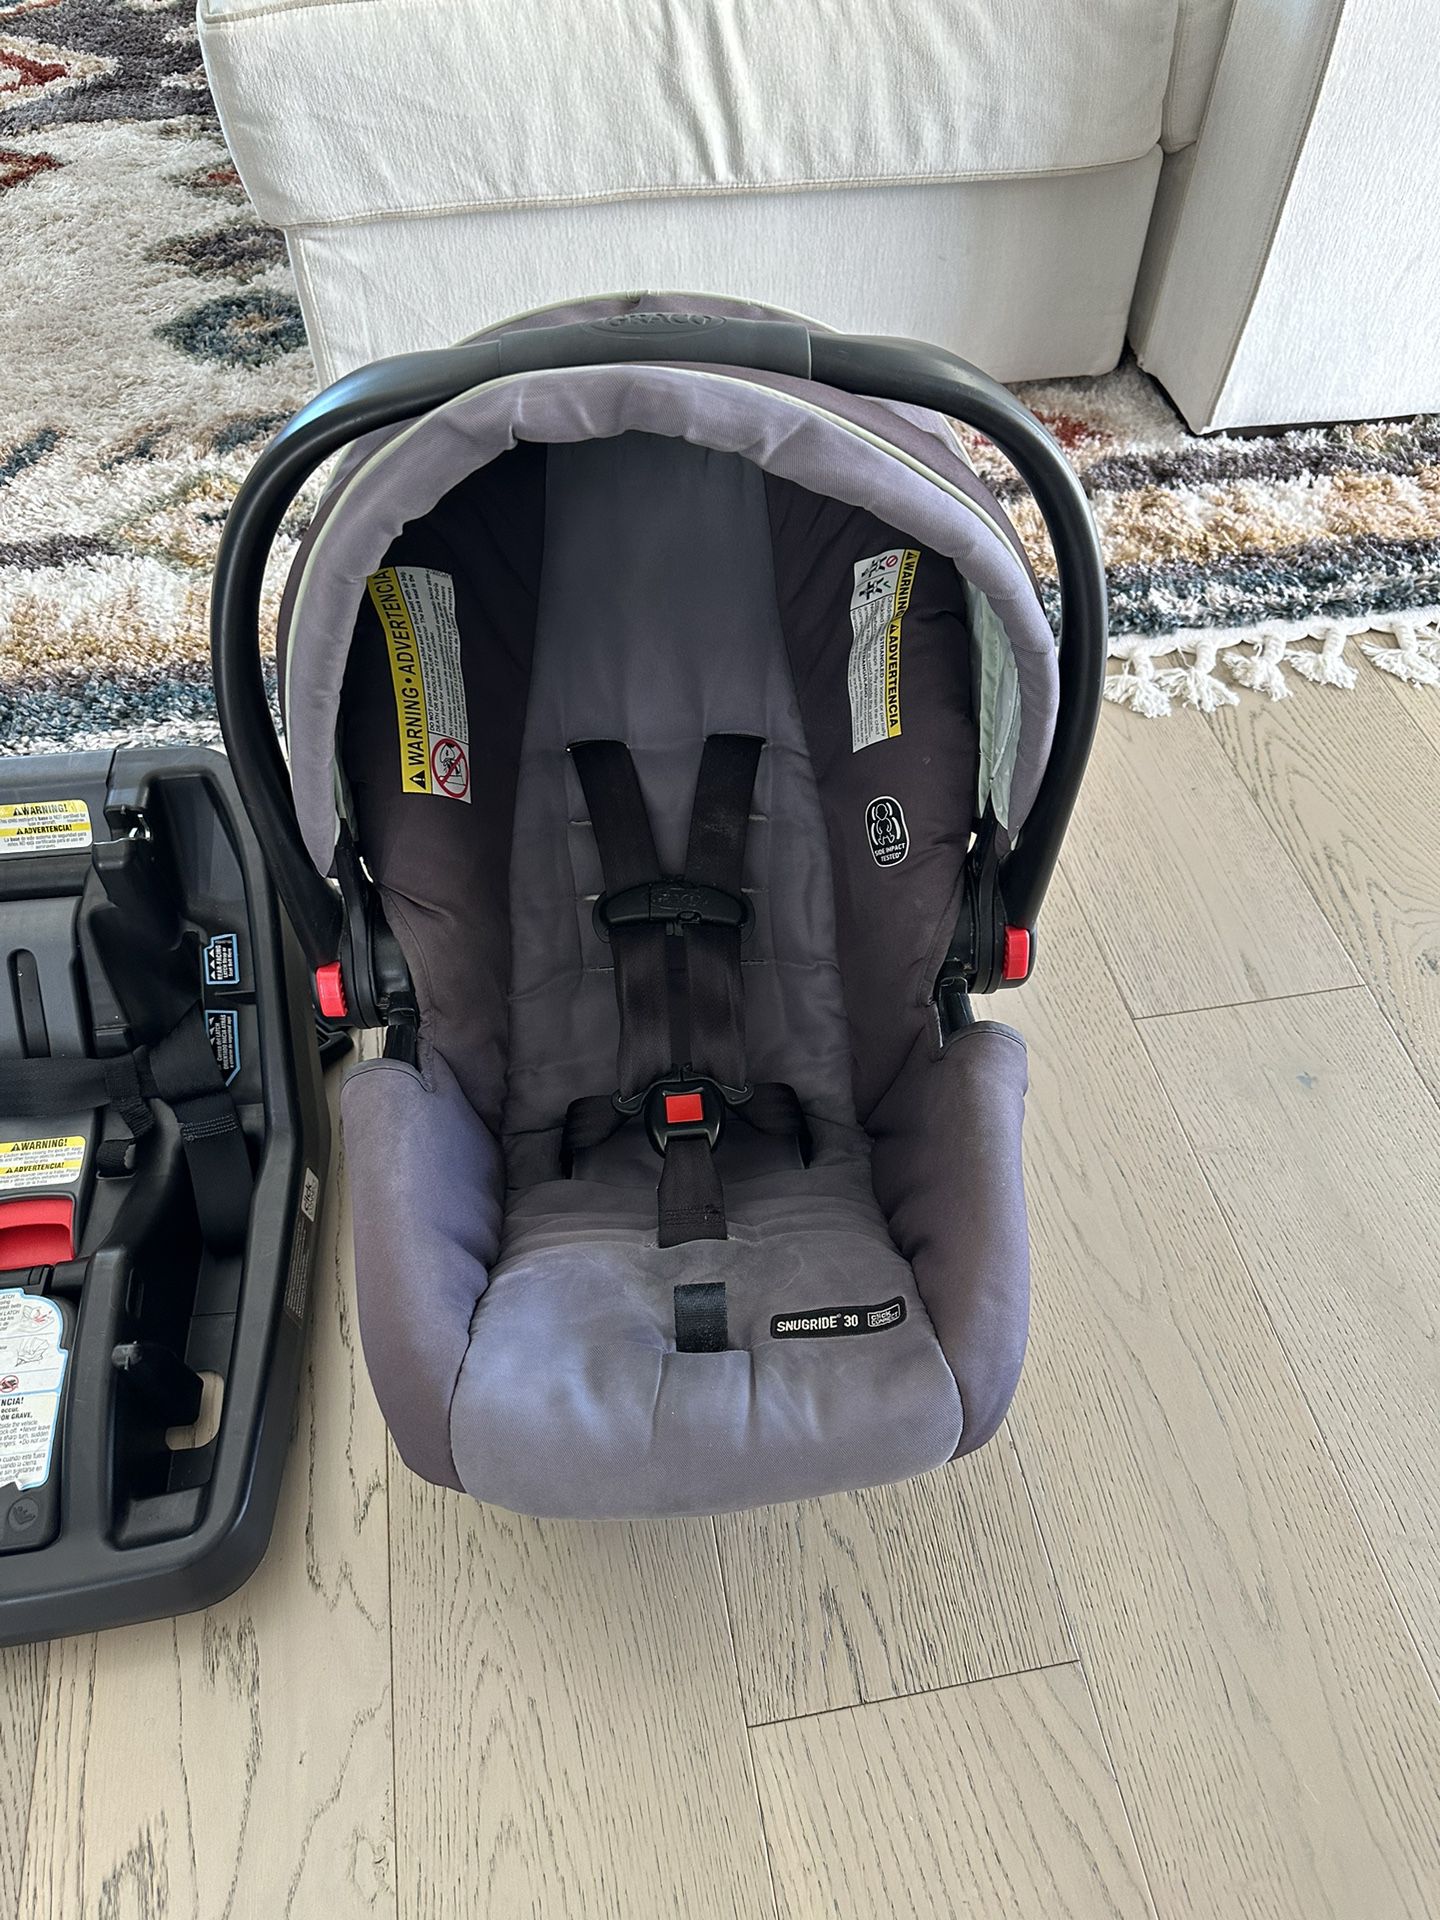 Graco Car seat With 2 Bases